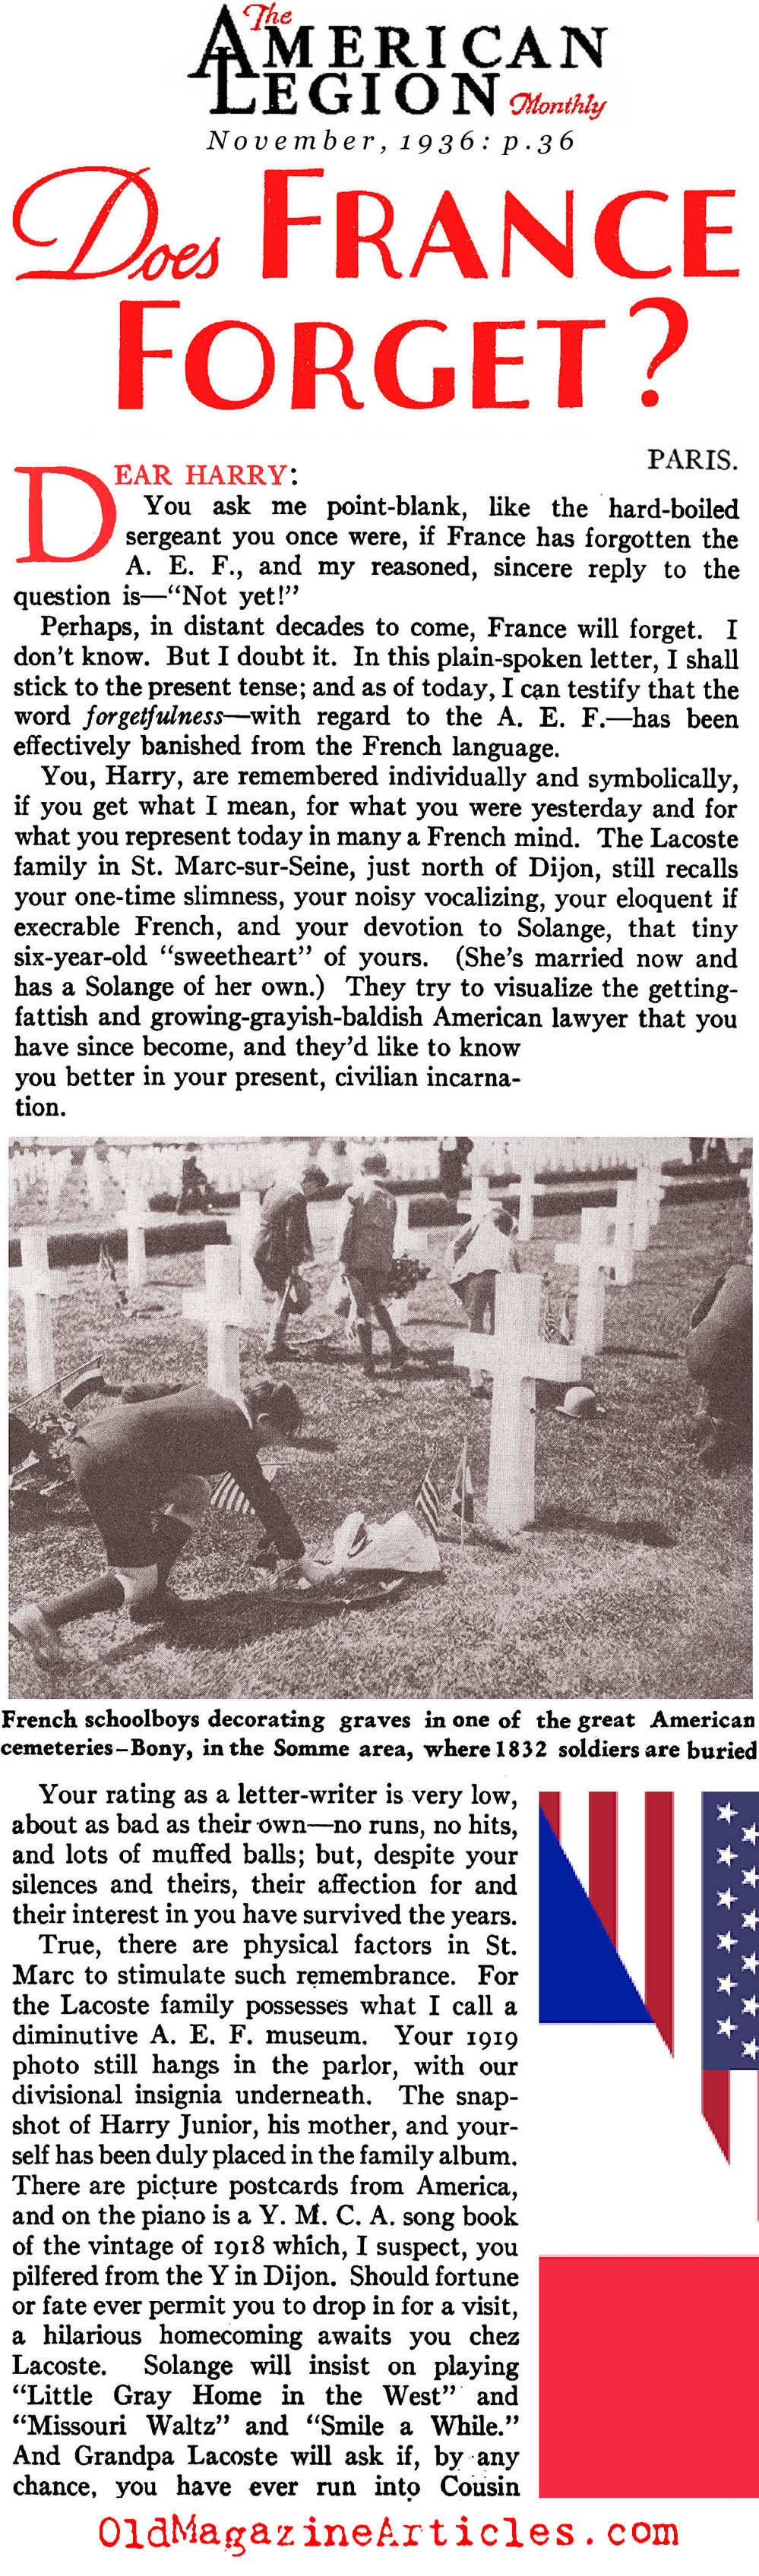 American W.W. I  Cemeteries and  French Gratitude (American Legion Monthly, 1936)